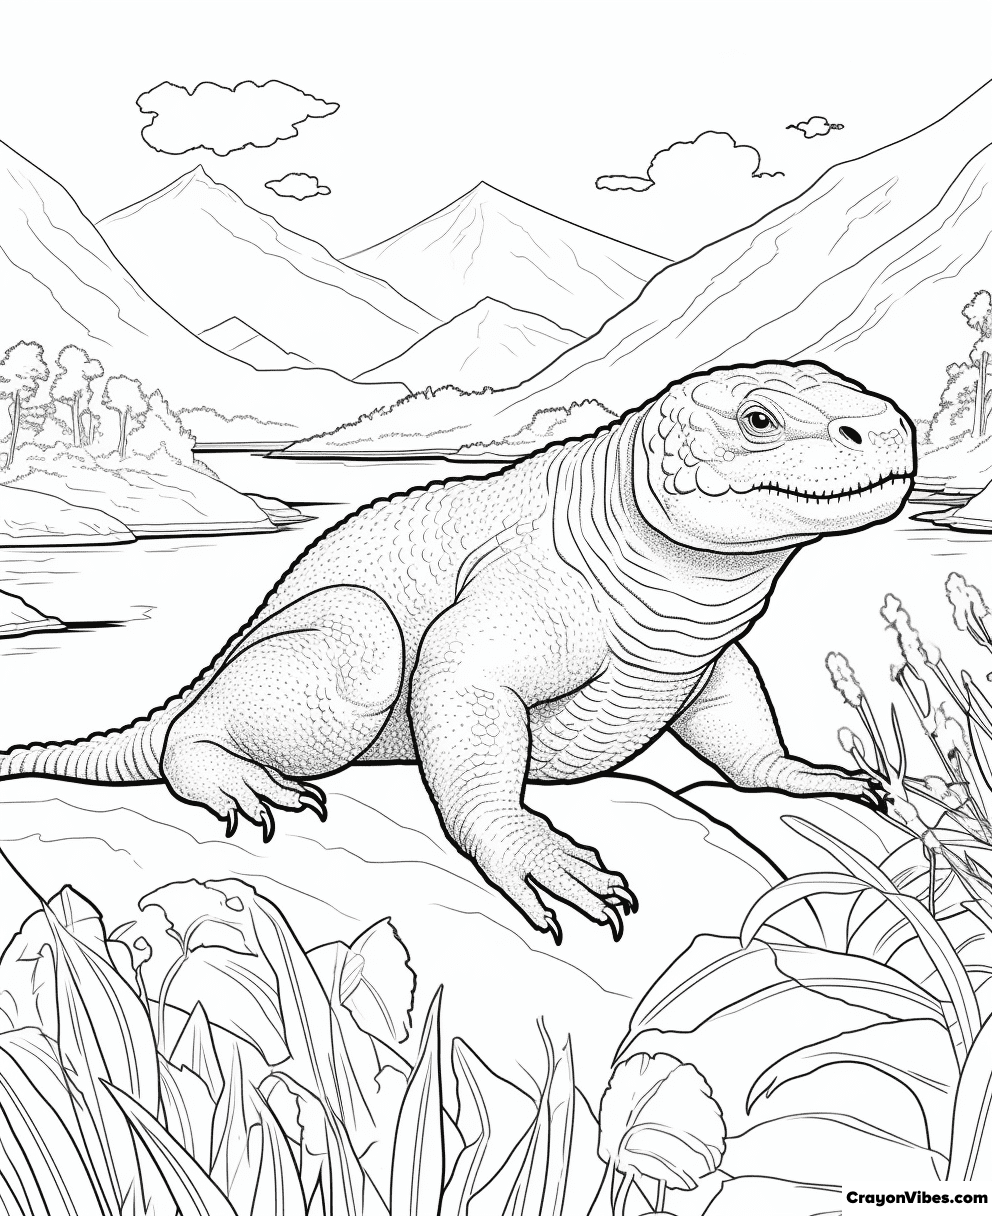 Komodo Dragon Coloring Pages Free Printable for Kids and Adults